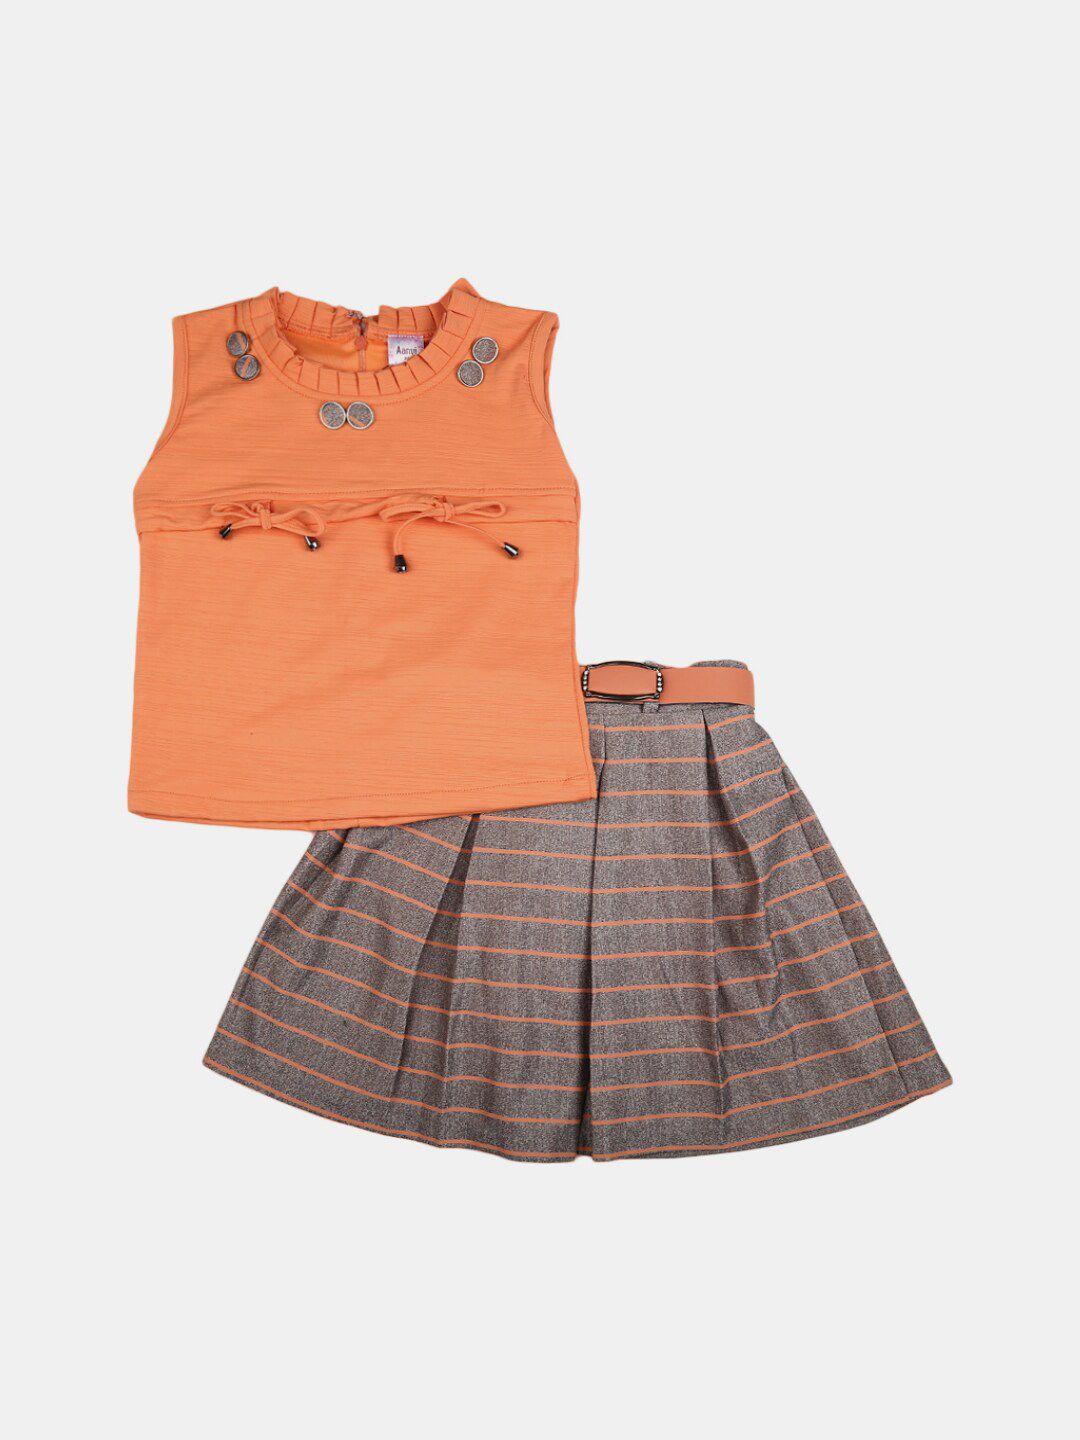 v-mart kids peach-coloured & grey printed pure cotton t-shirt with skirt